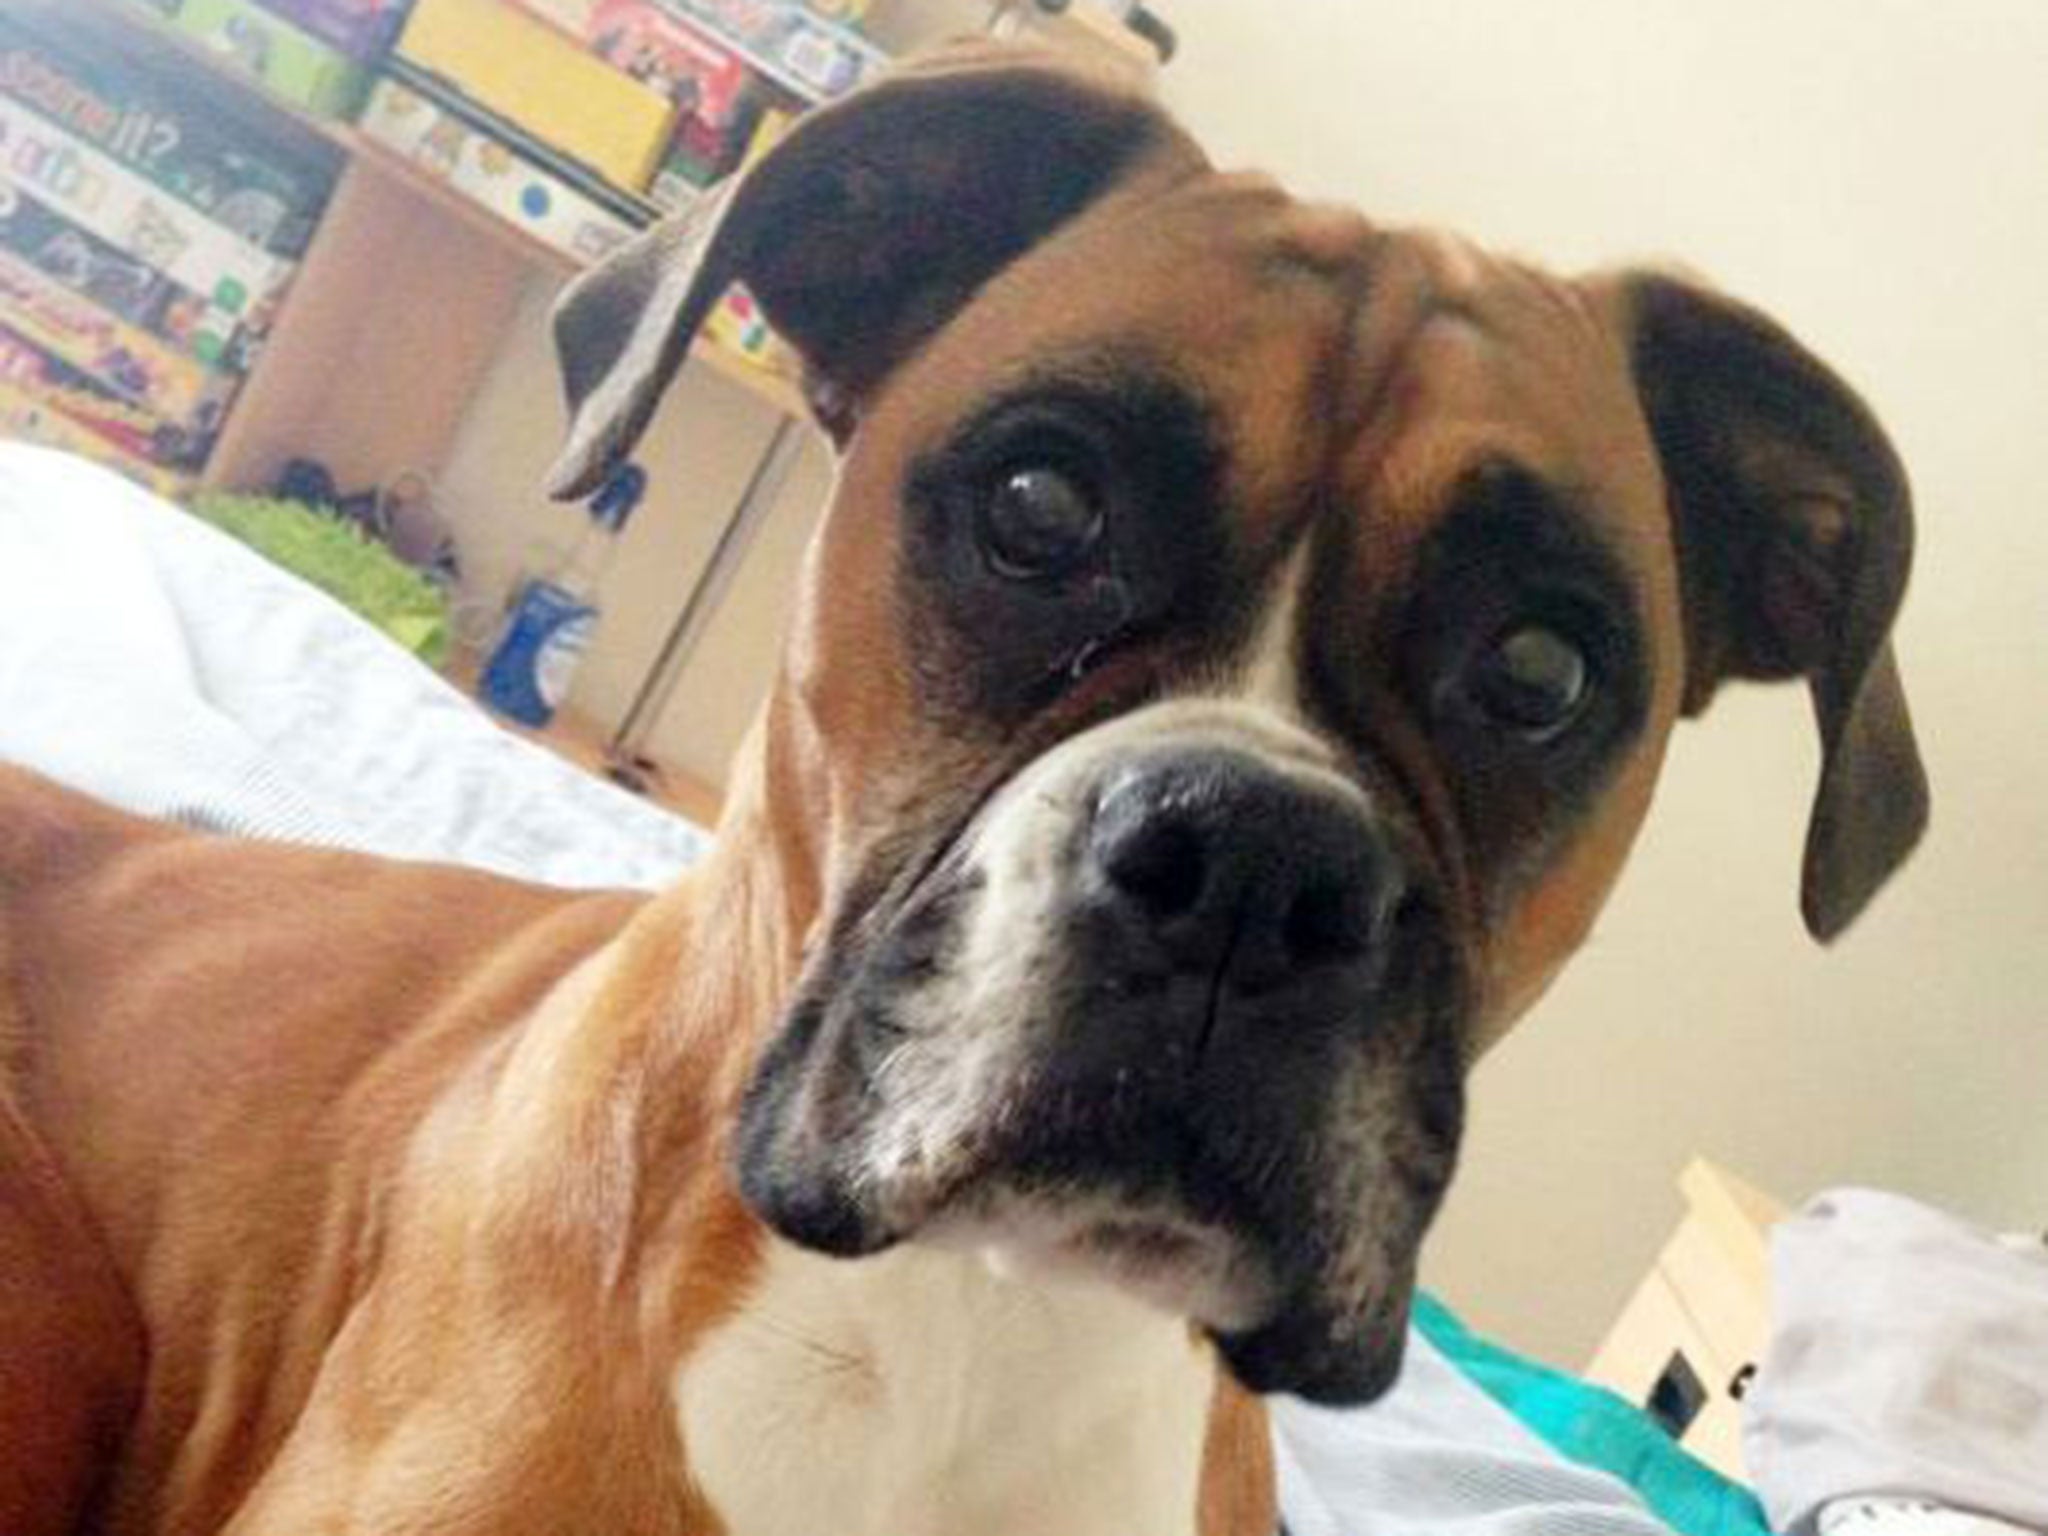 Roxy the five-year-old boxer locked her pet dog in a kitchen and left it to die by trainee solicitor Katy Gammon. The photograph was issued by her former boyfriend Adam Taylor